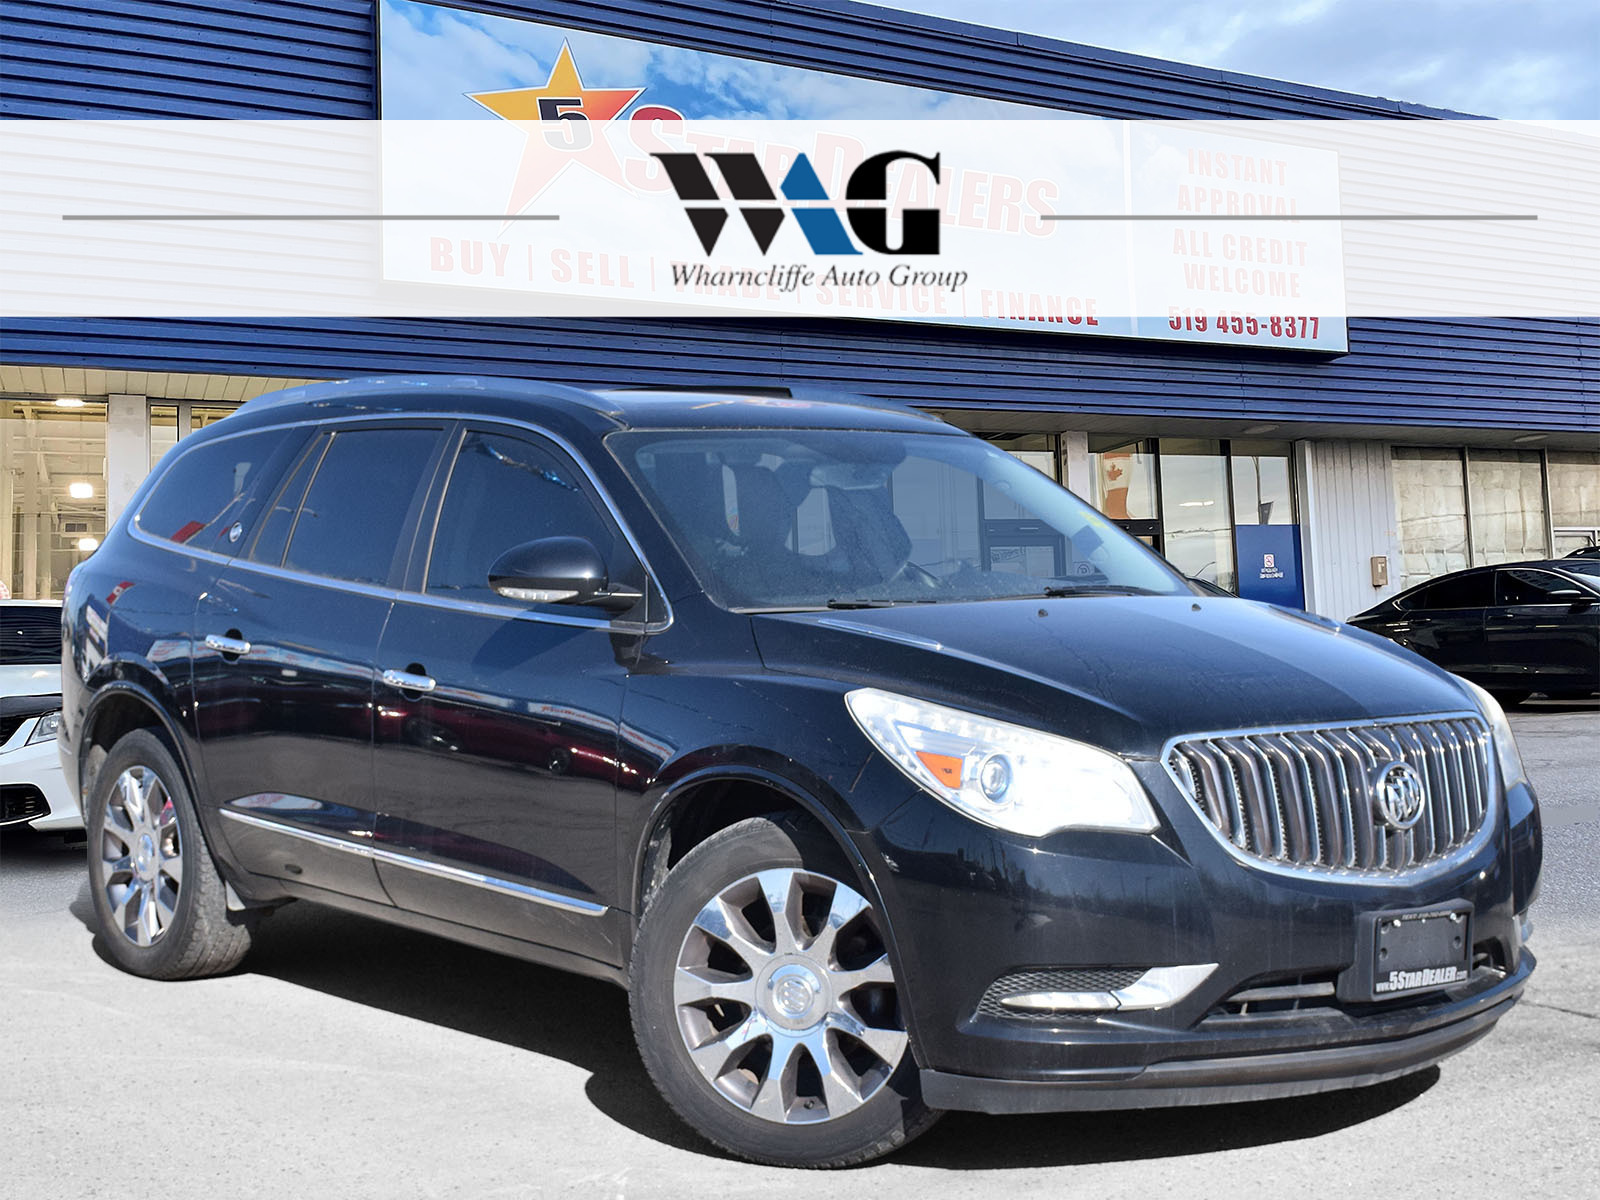 2016 Buick Enclave NAV LEATHER PANO ROOF LOADED WE FINANCE ALL CREDIT